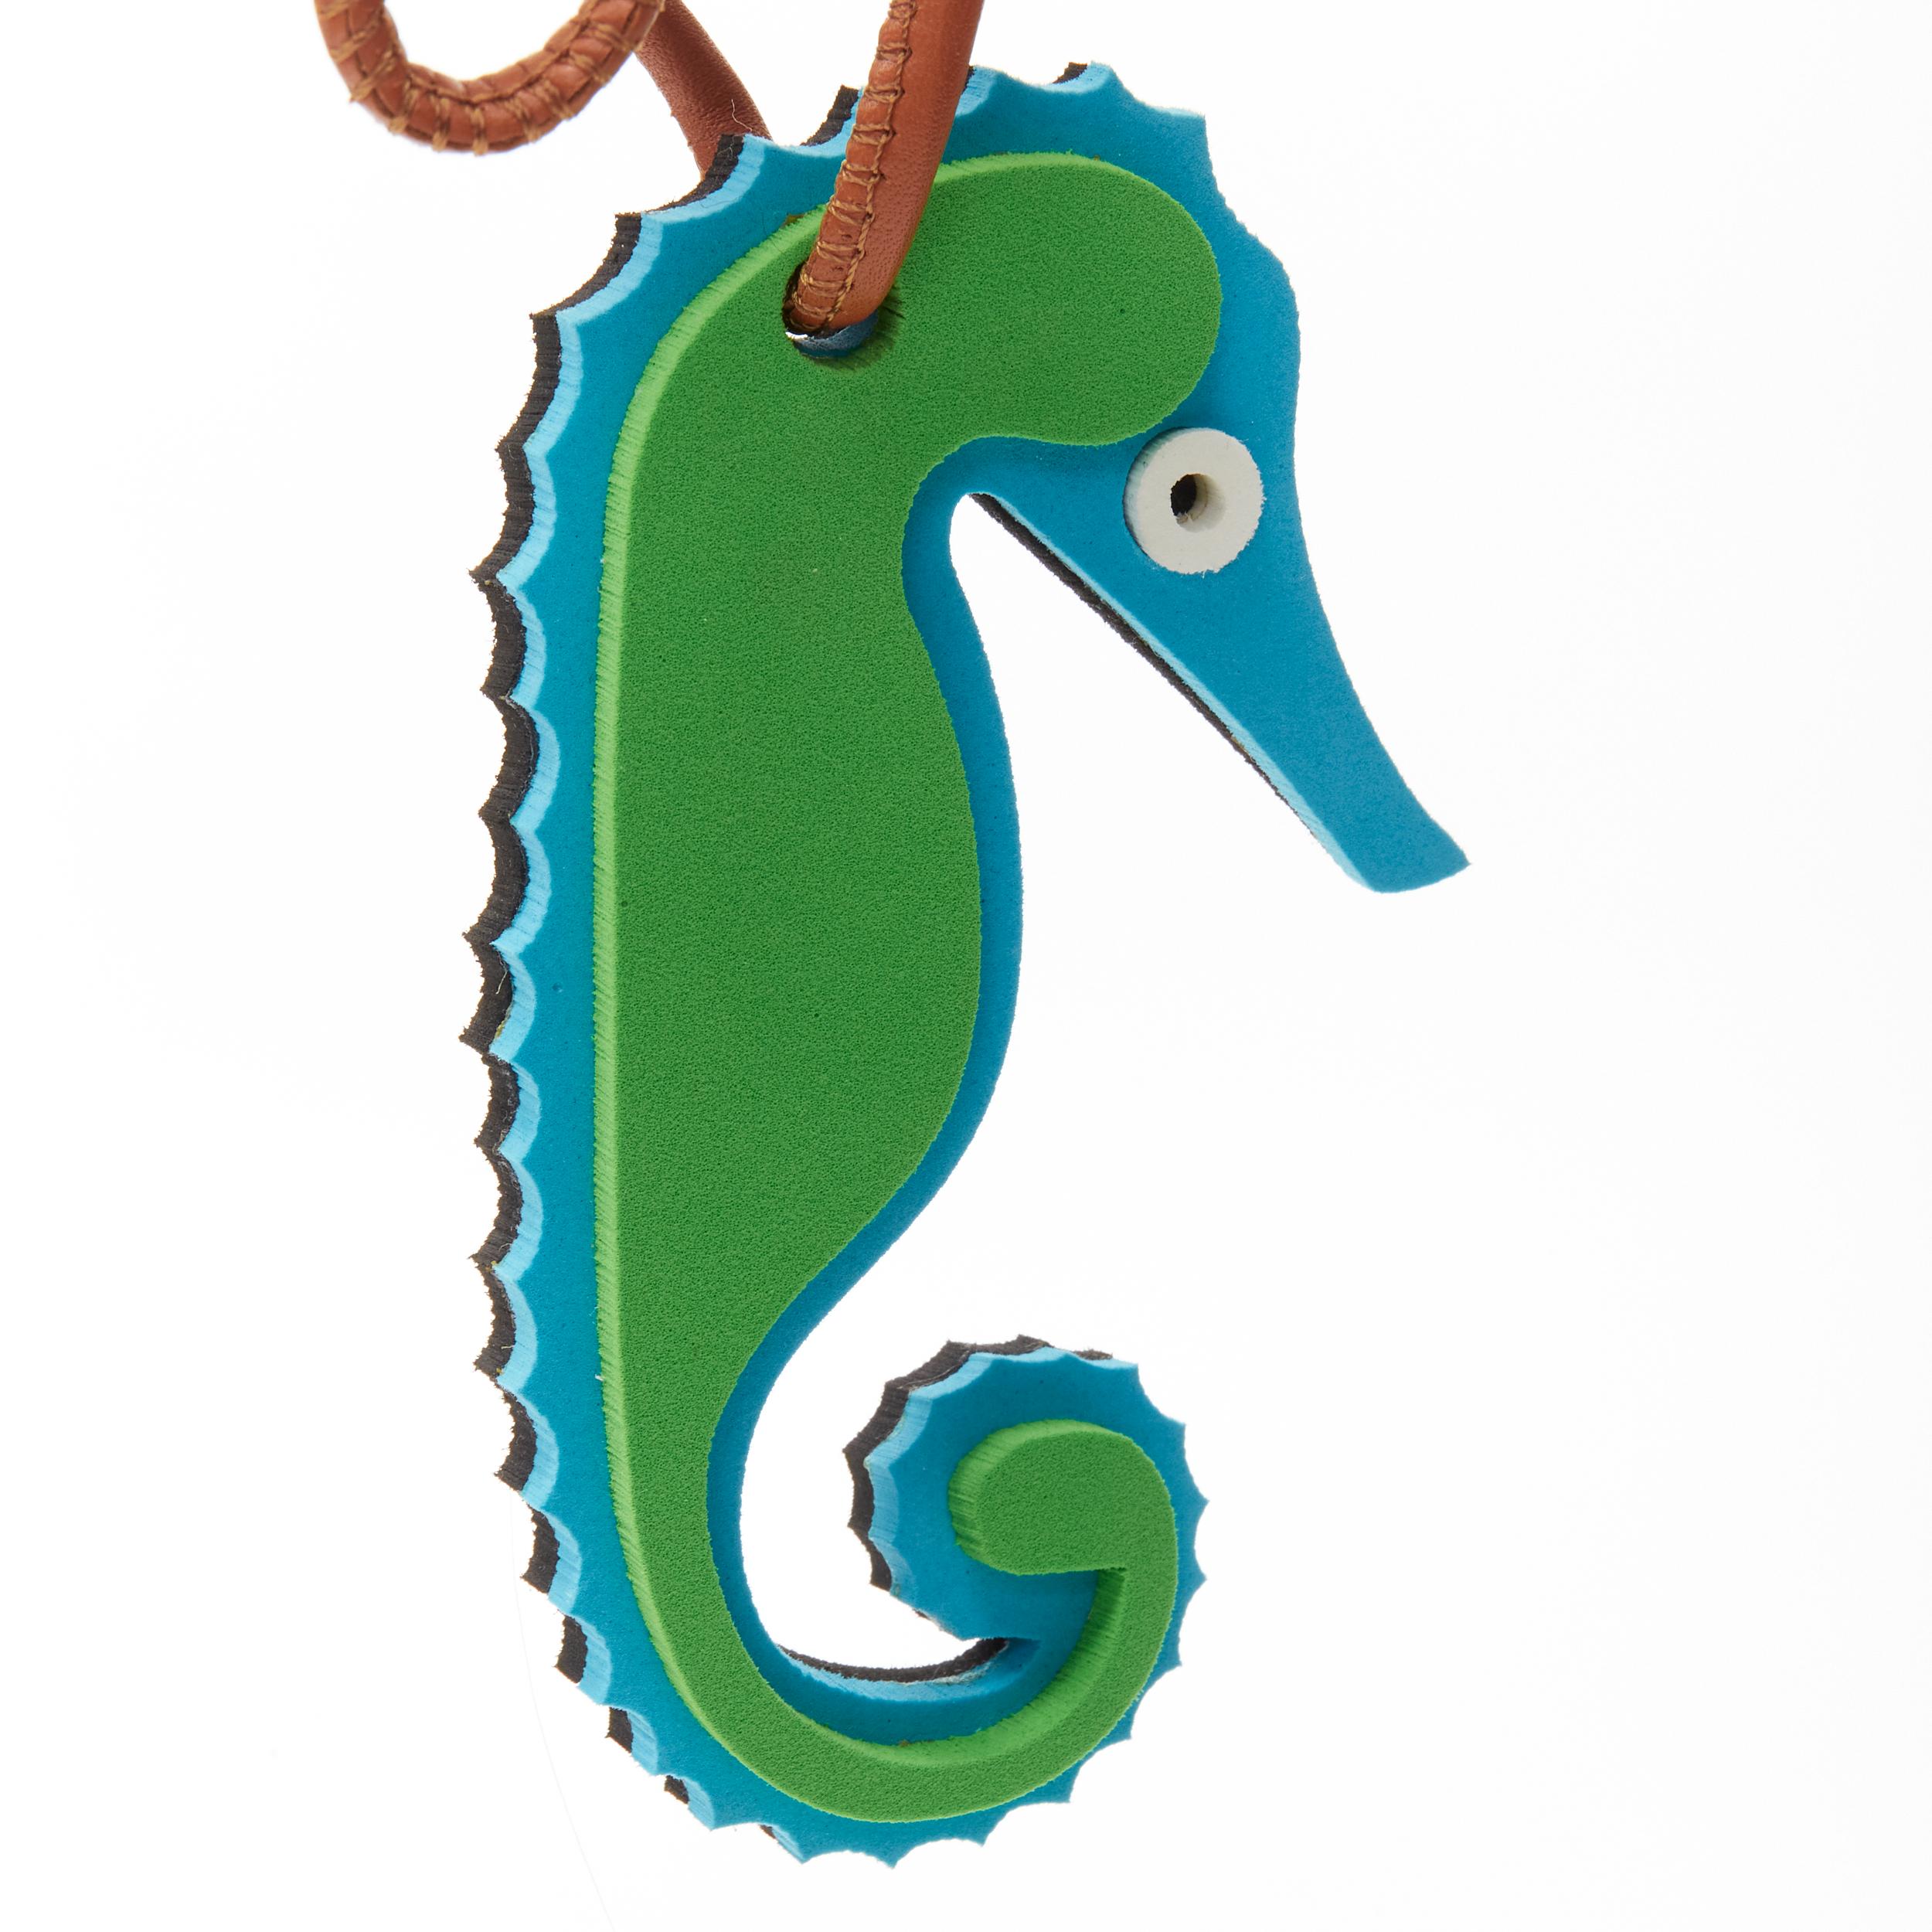 LOEWE grene blue seahorse foam brown leather cord bag charm 
Reference: ANWU/A00106 
Brand: Loewe 
Designer: JW Anderson 
Material: Foam 
Color: Green 
Pattern: Solid 
Closure: Tie 
Extra Detail: Styrofoam charm with leather cord self tie strap.